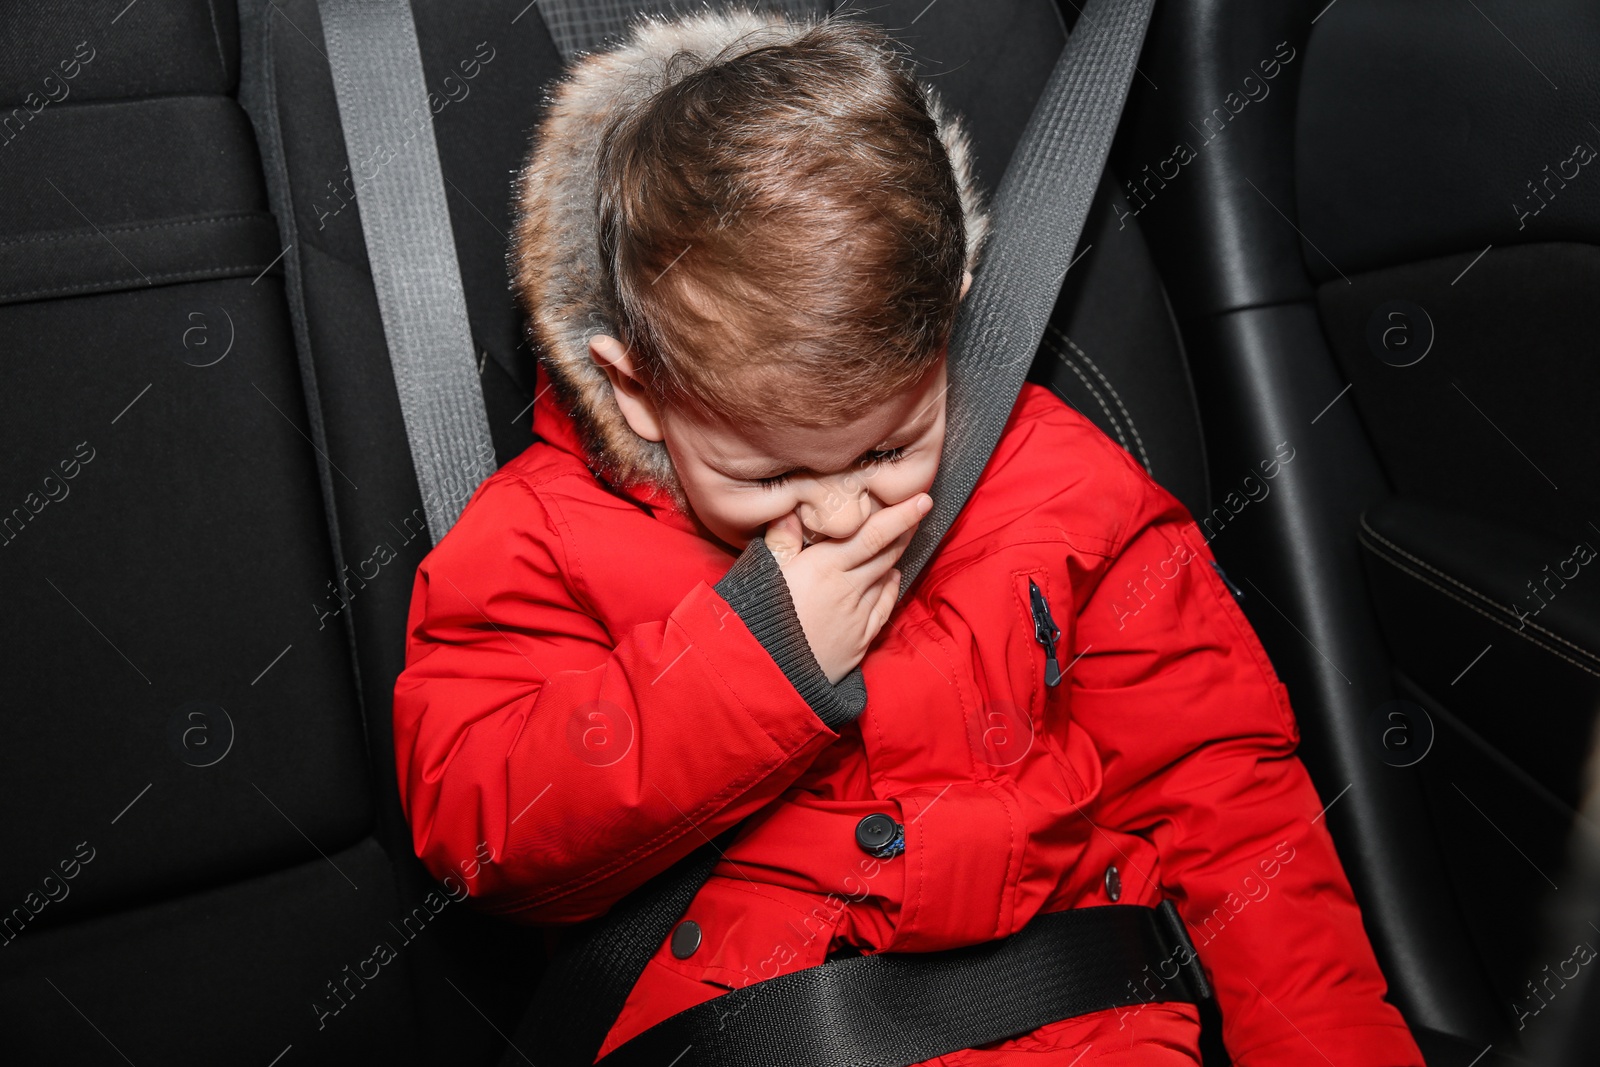 Photo of Little boy suffering from nausea in car